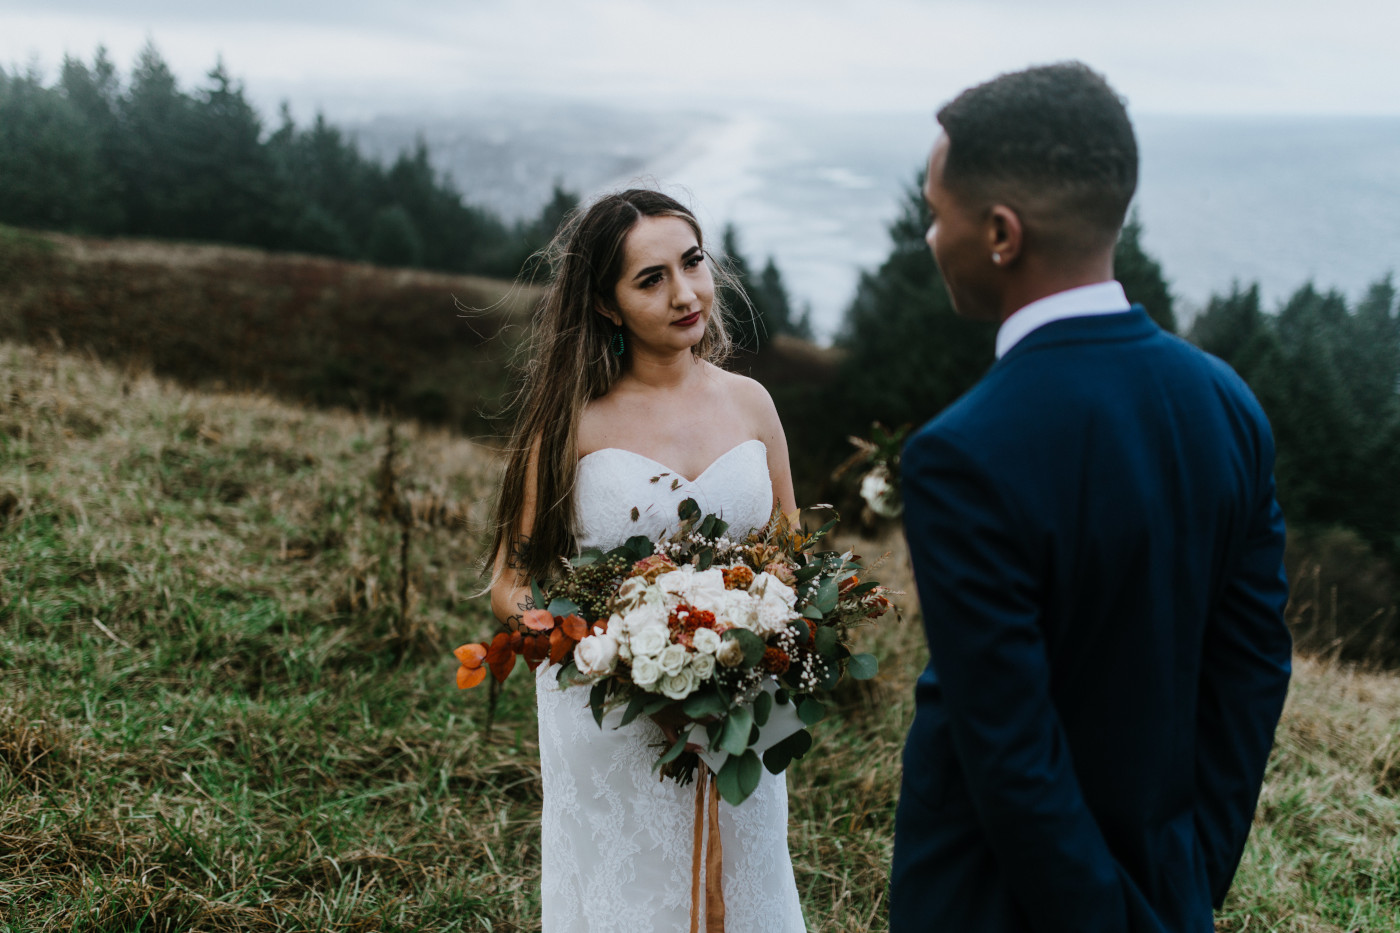 Deandre and Ariana saying their vows. Elopement photography at Mount Hood by Sienna Plus Josh.